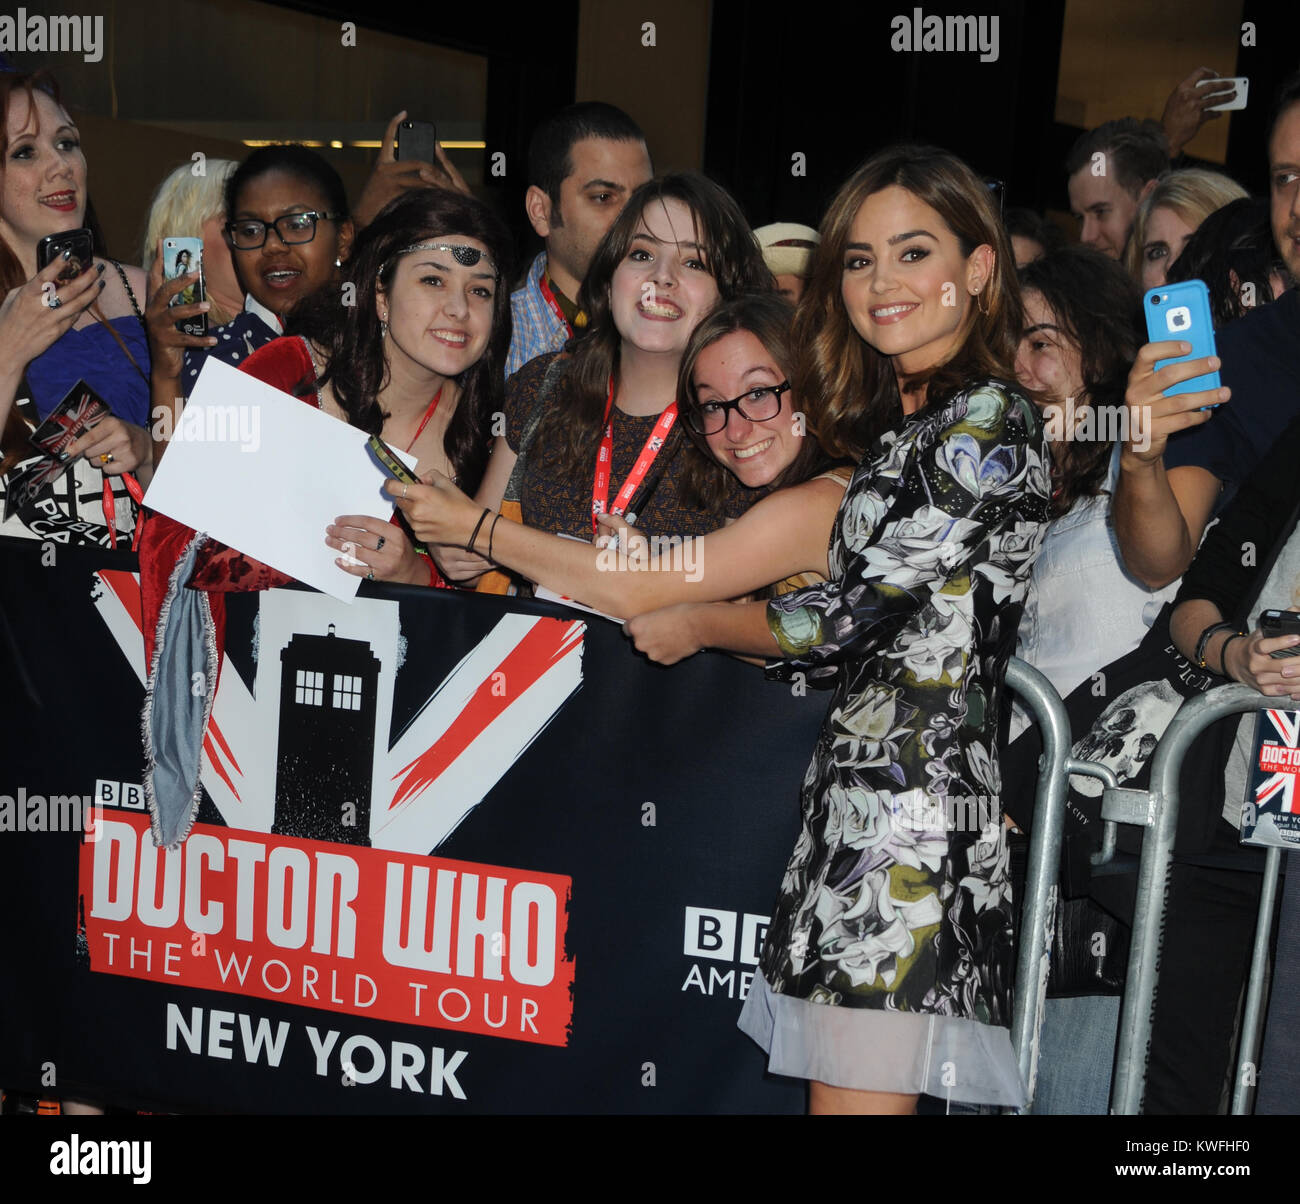 NEW YORK, NY - AUGUST 14:  Jenna Coleman  attends BBC America's 'Doctor Who' Premiere Fan Screening at Ziegfeld Theater on August 14, 2014 in New York City  People:  Jenna Coleman Stock Photo